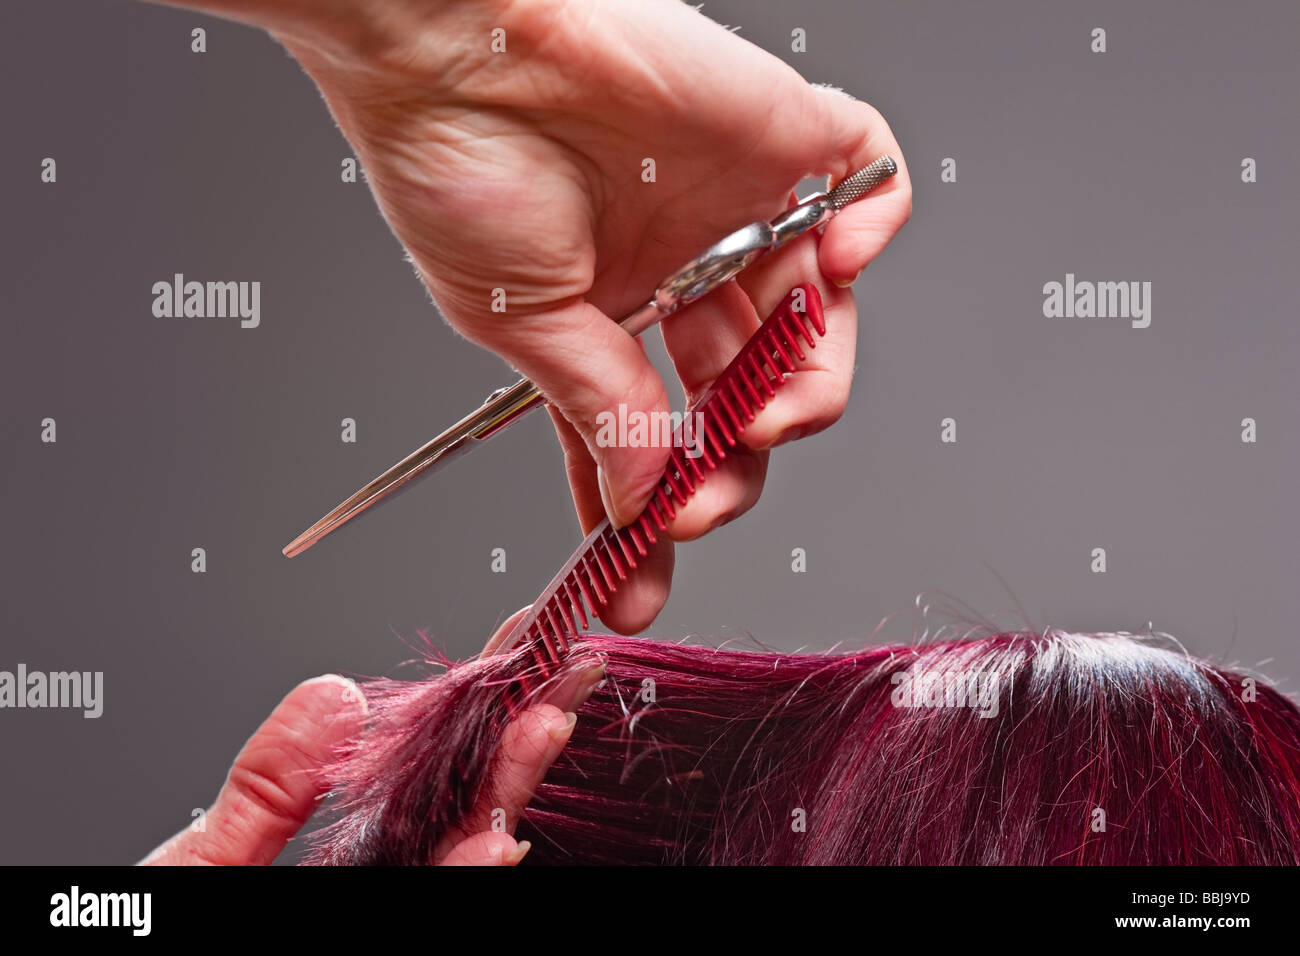 Close up of hairdresser's hands styling client's hair Stock Photo